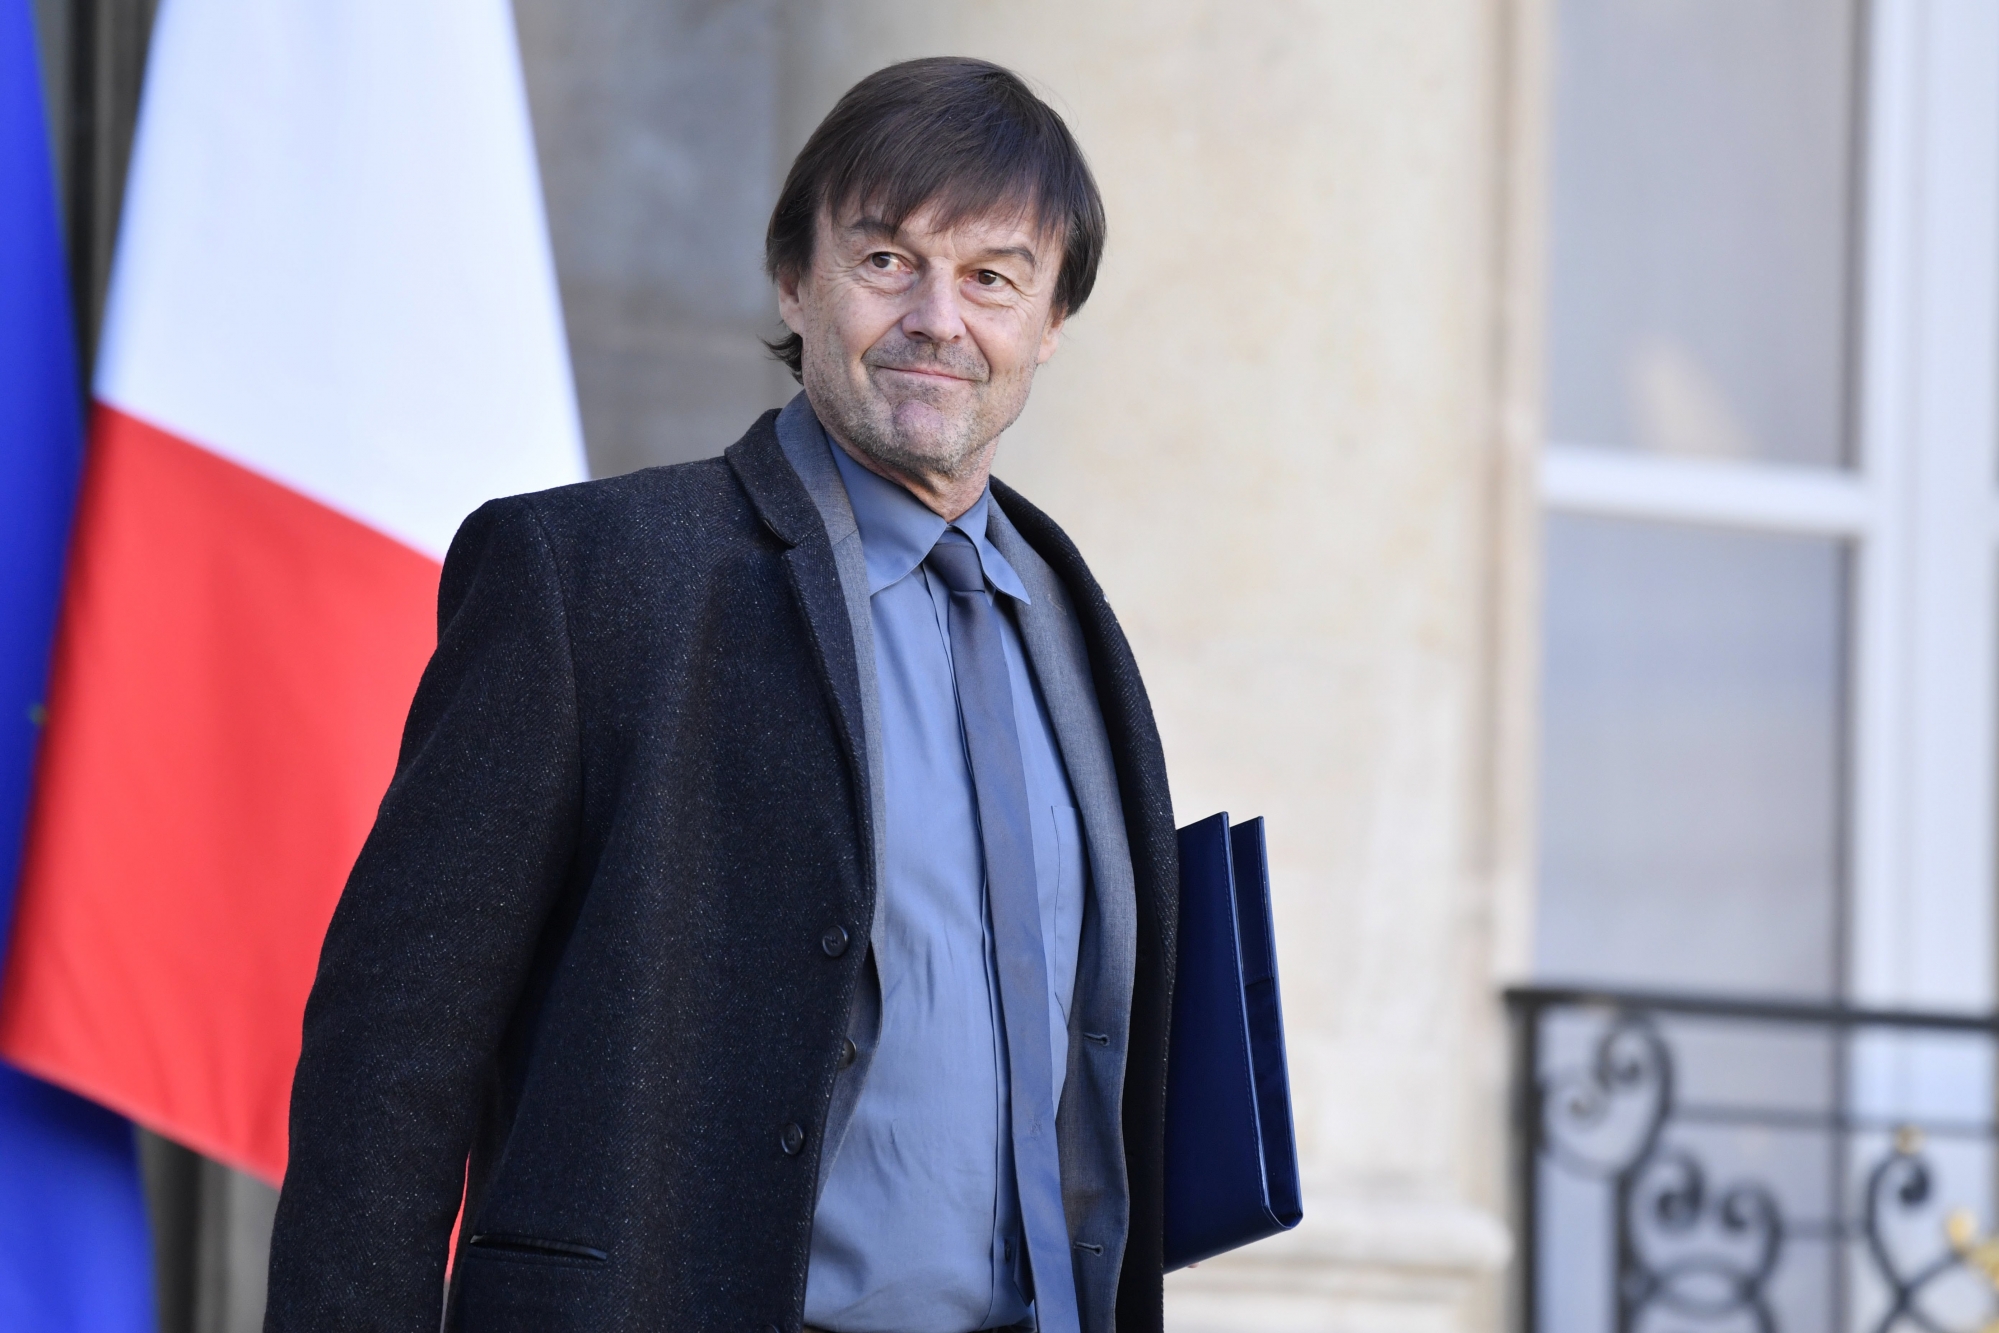 epa06343991 French Ecology minister Nicolas Hulot leaves the Elysee palace after the weekly cabinet meeting in Paris, France, 22 November 2017.  EPA/JULIEN DE ROSA FRANCE CABINET MEETING